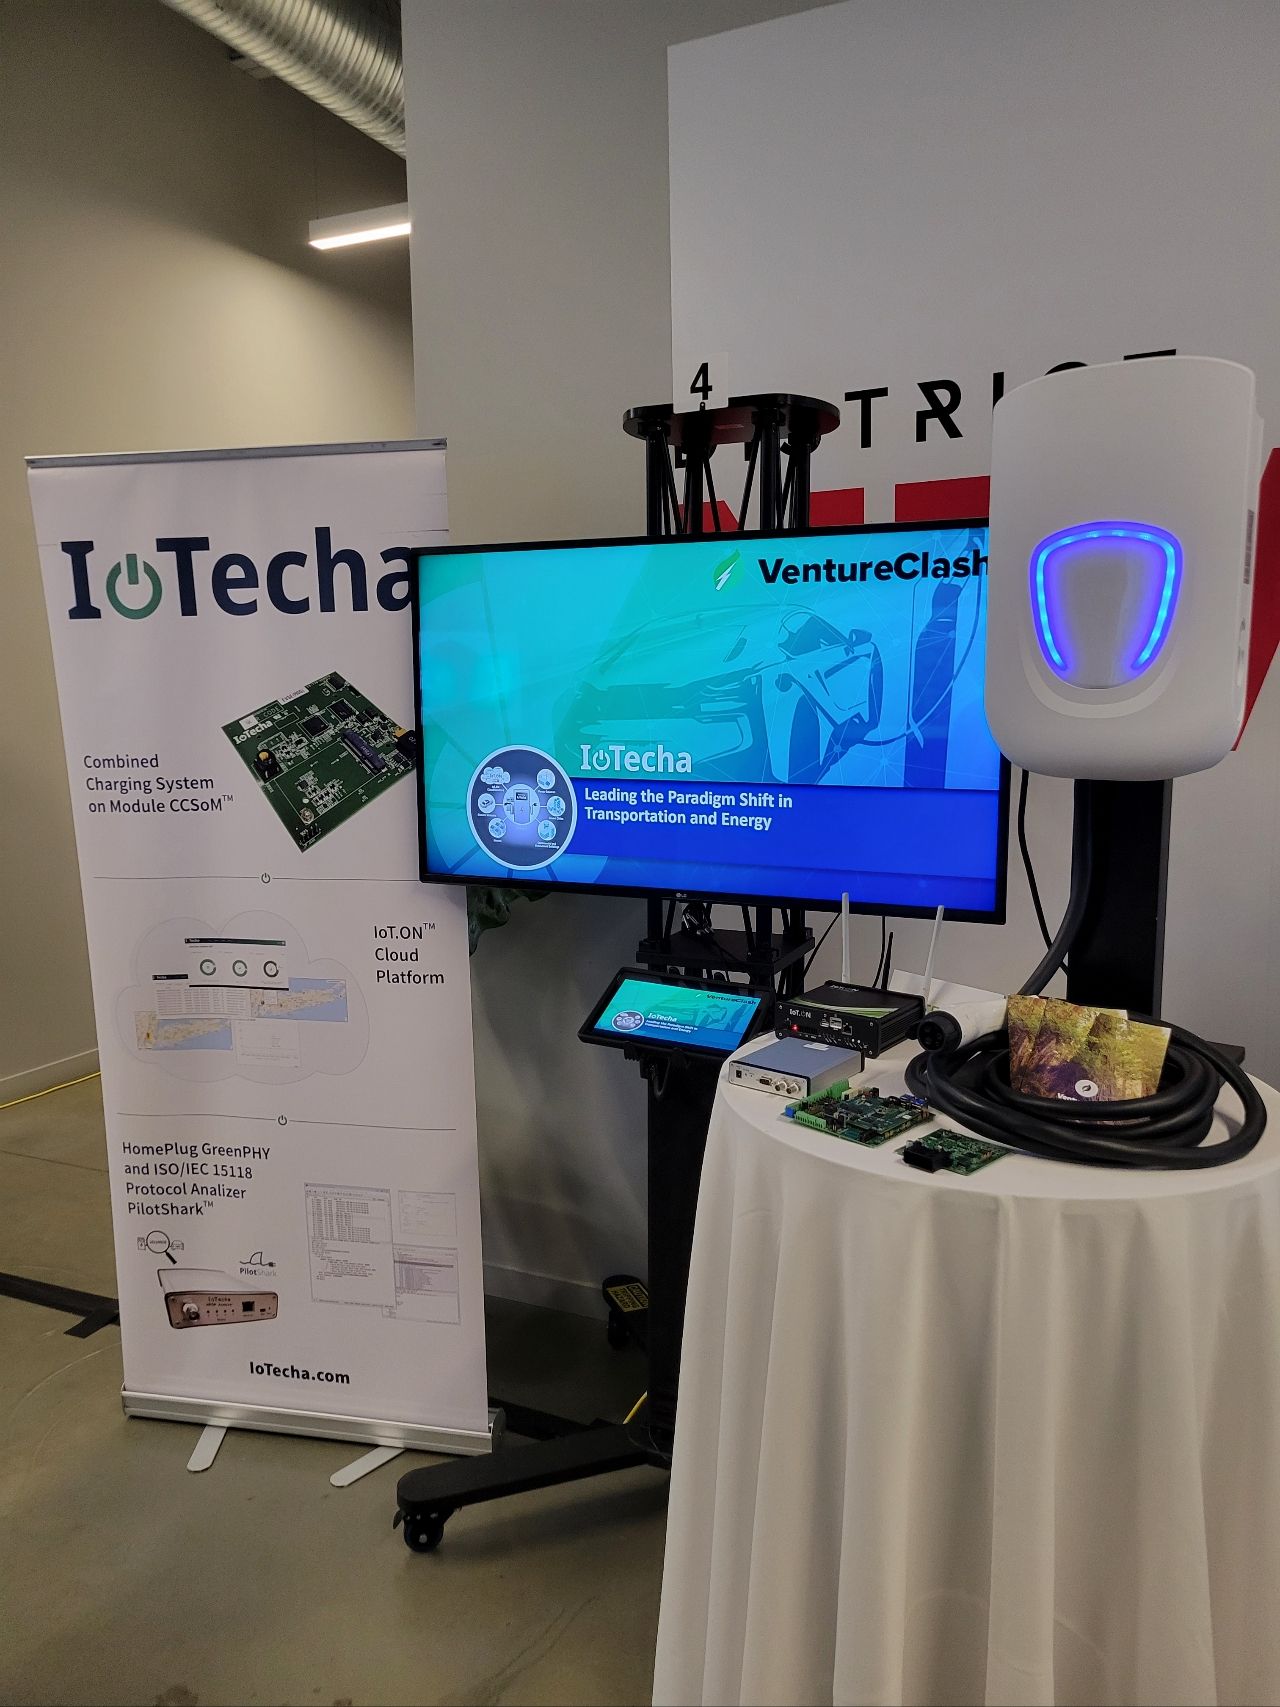 We are proud to see IoTecha Corp presenting at the VentureClash Climate Edition in New Haven, CT today!